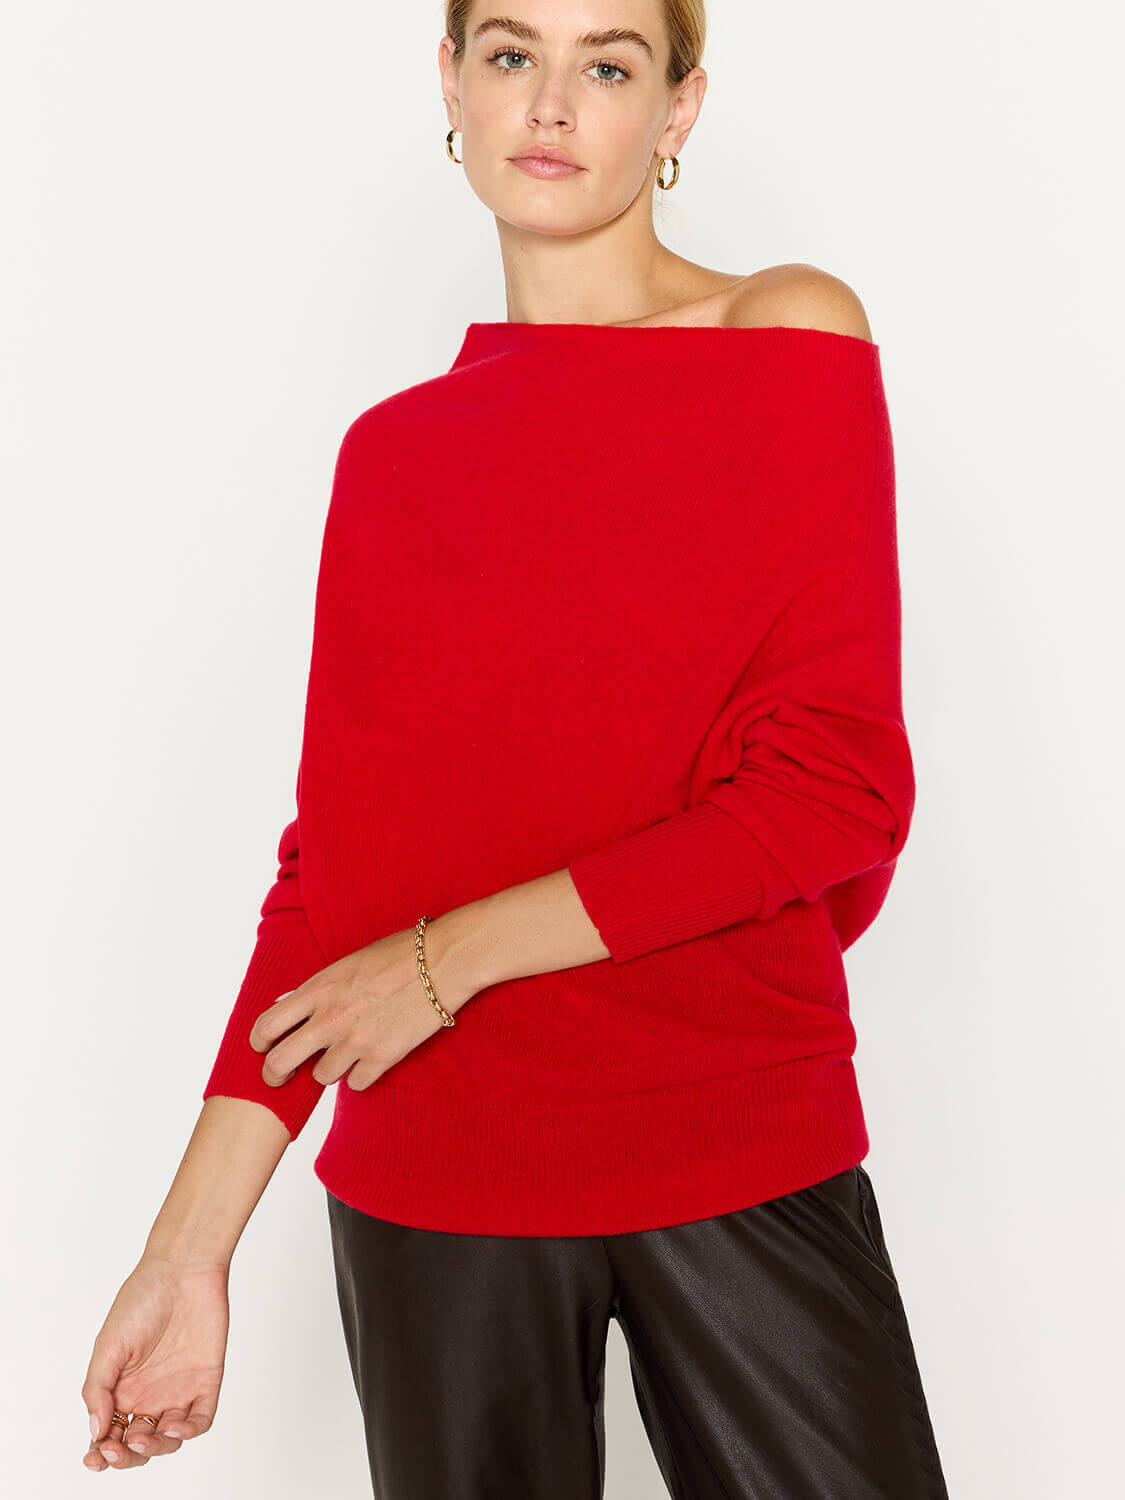 Lori cashmere off shoulder red sweater front view 2